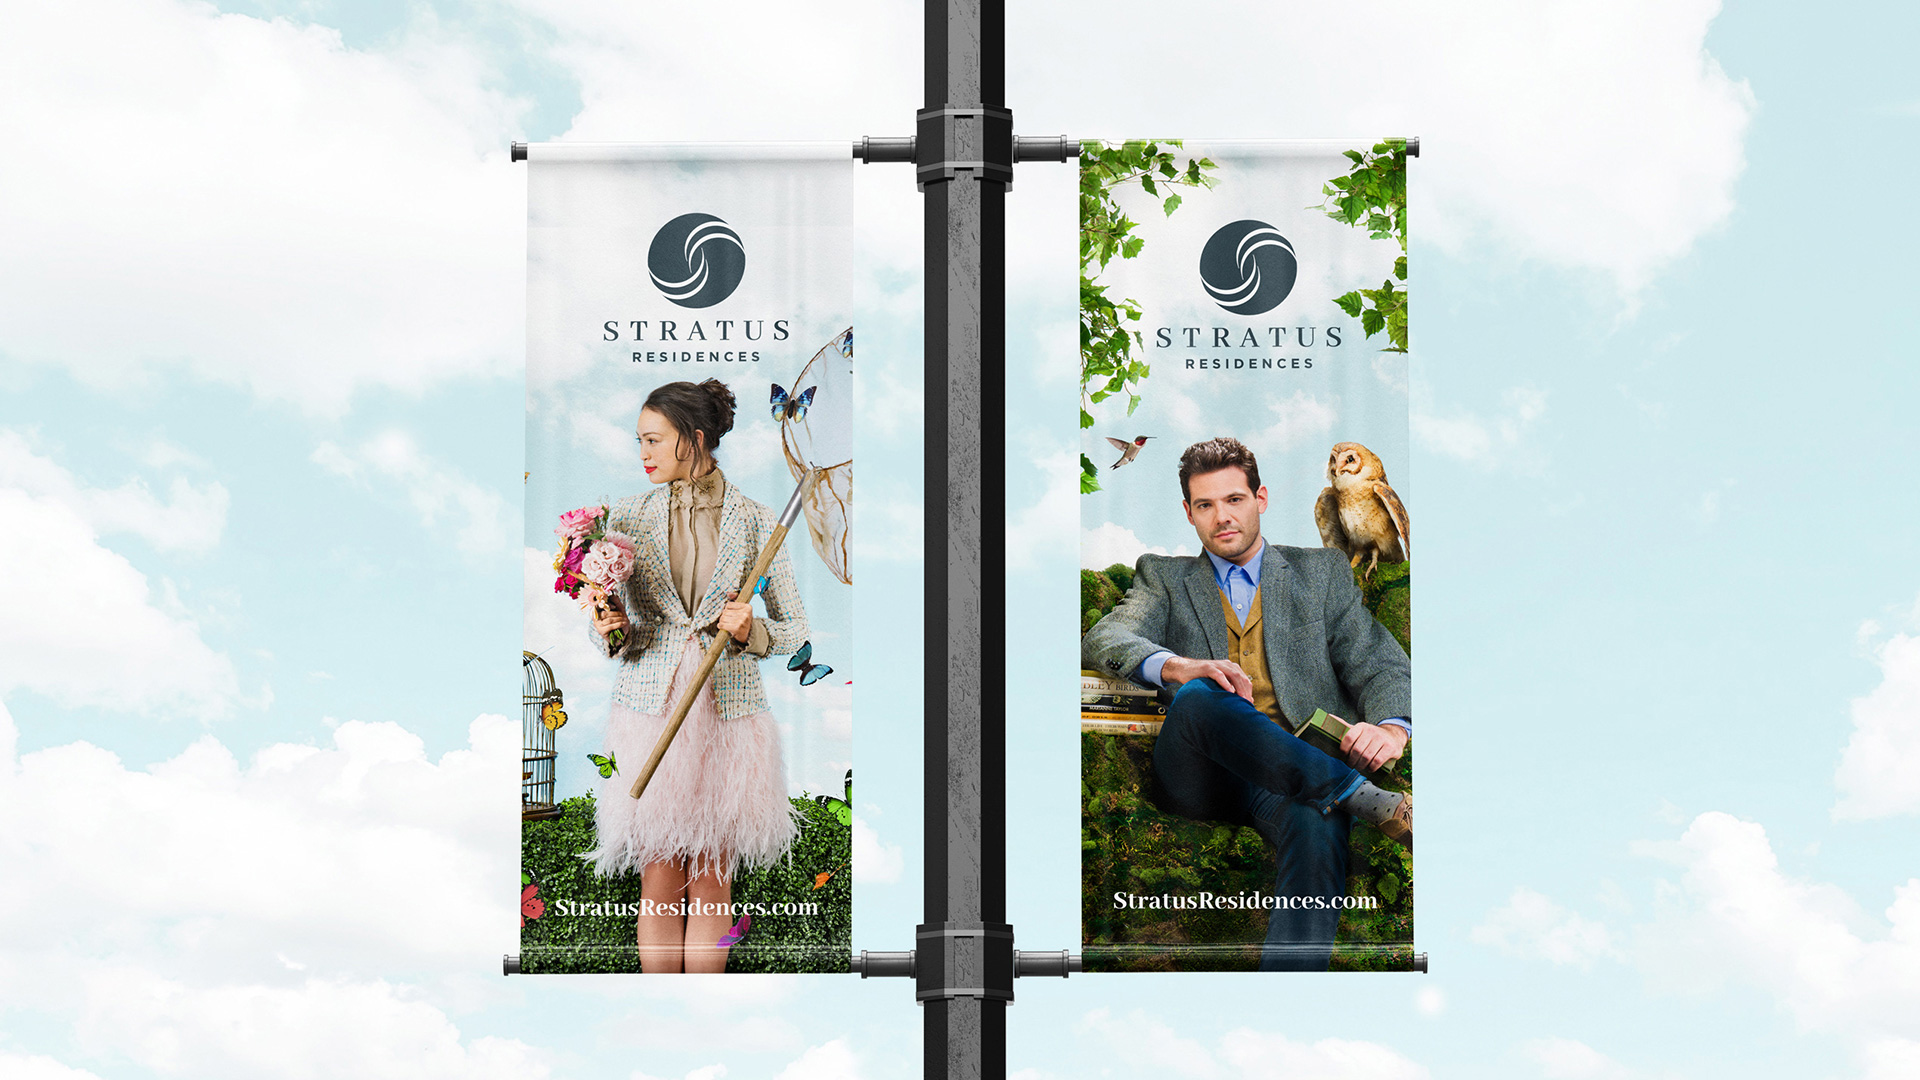 stratus residences pole flags with print campaign images